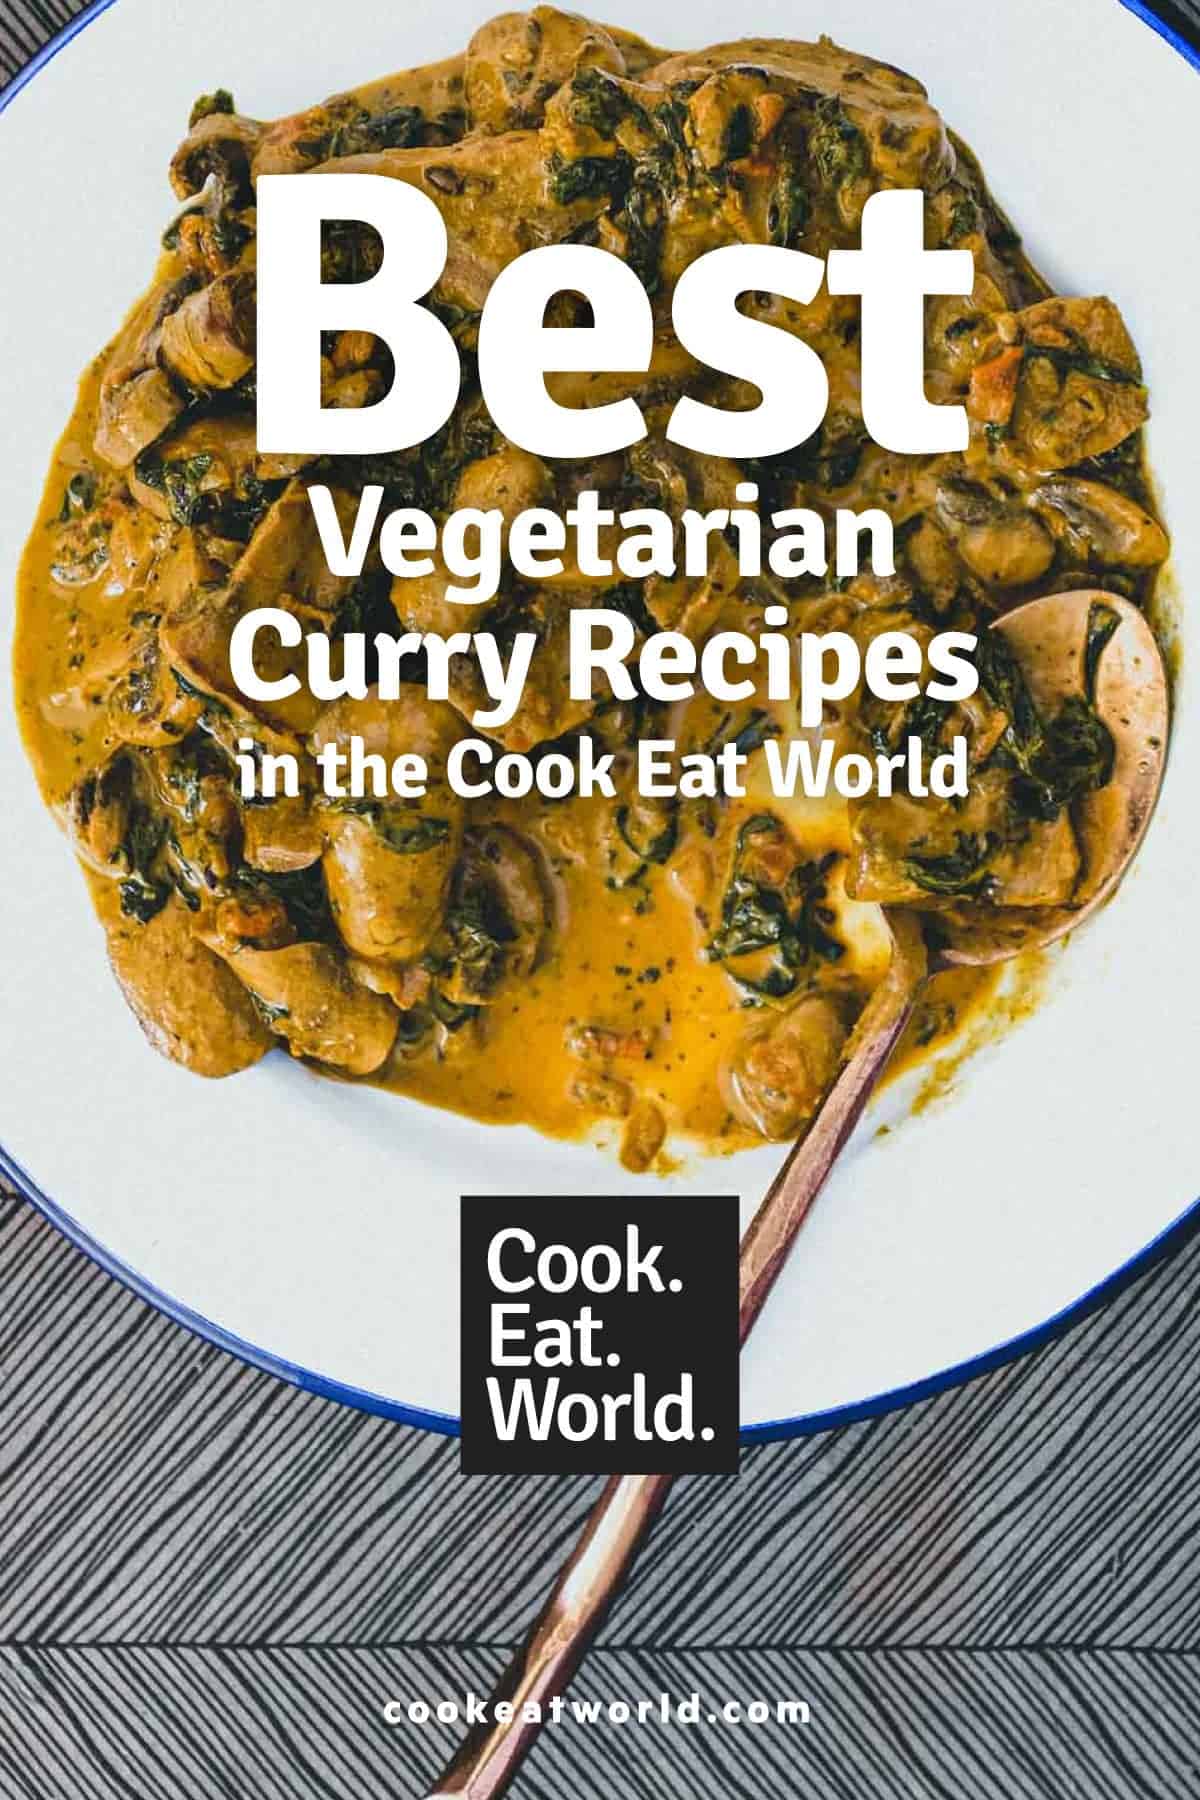 A bowl of vegetarian curry - My Best Vegetarian Curry Recipes